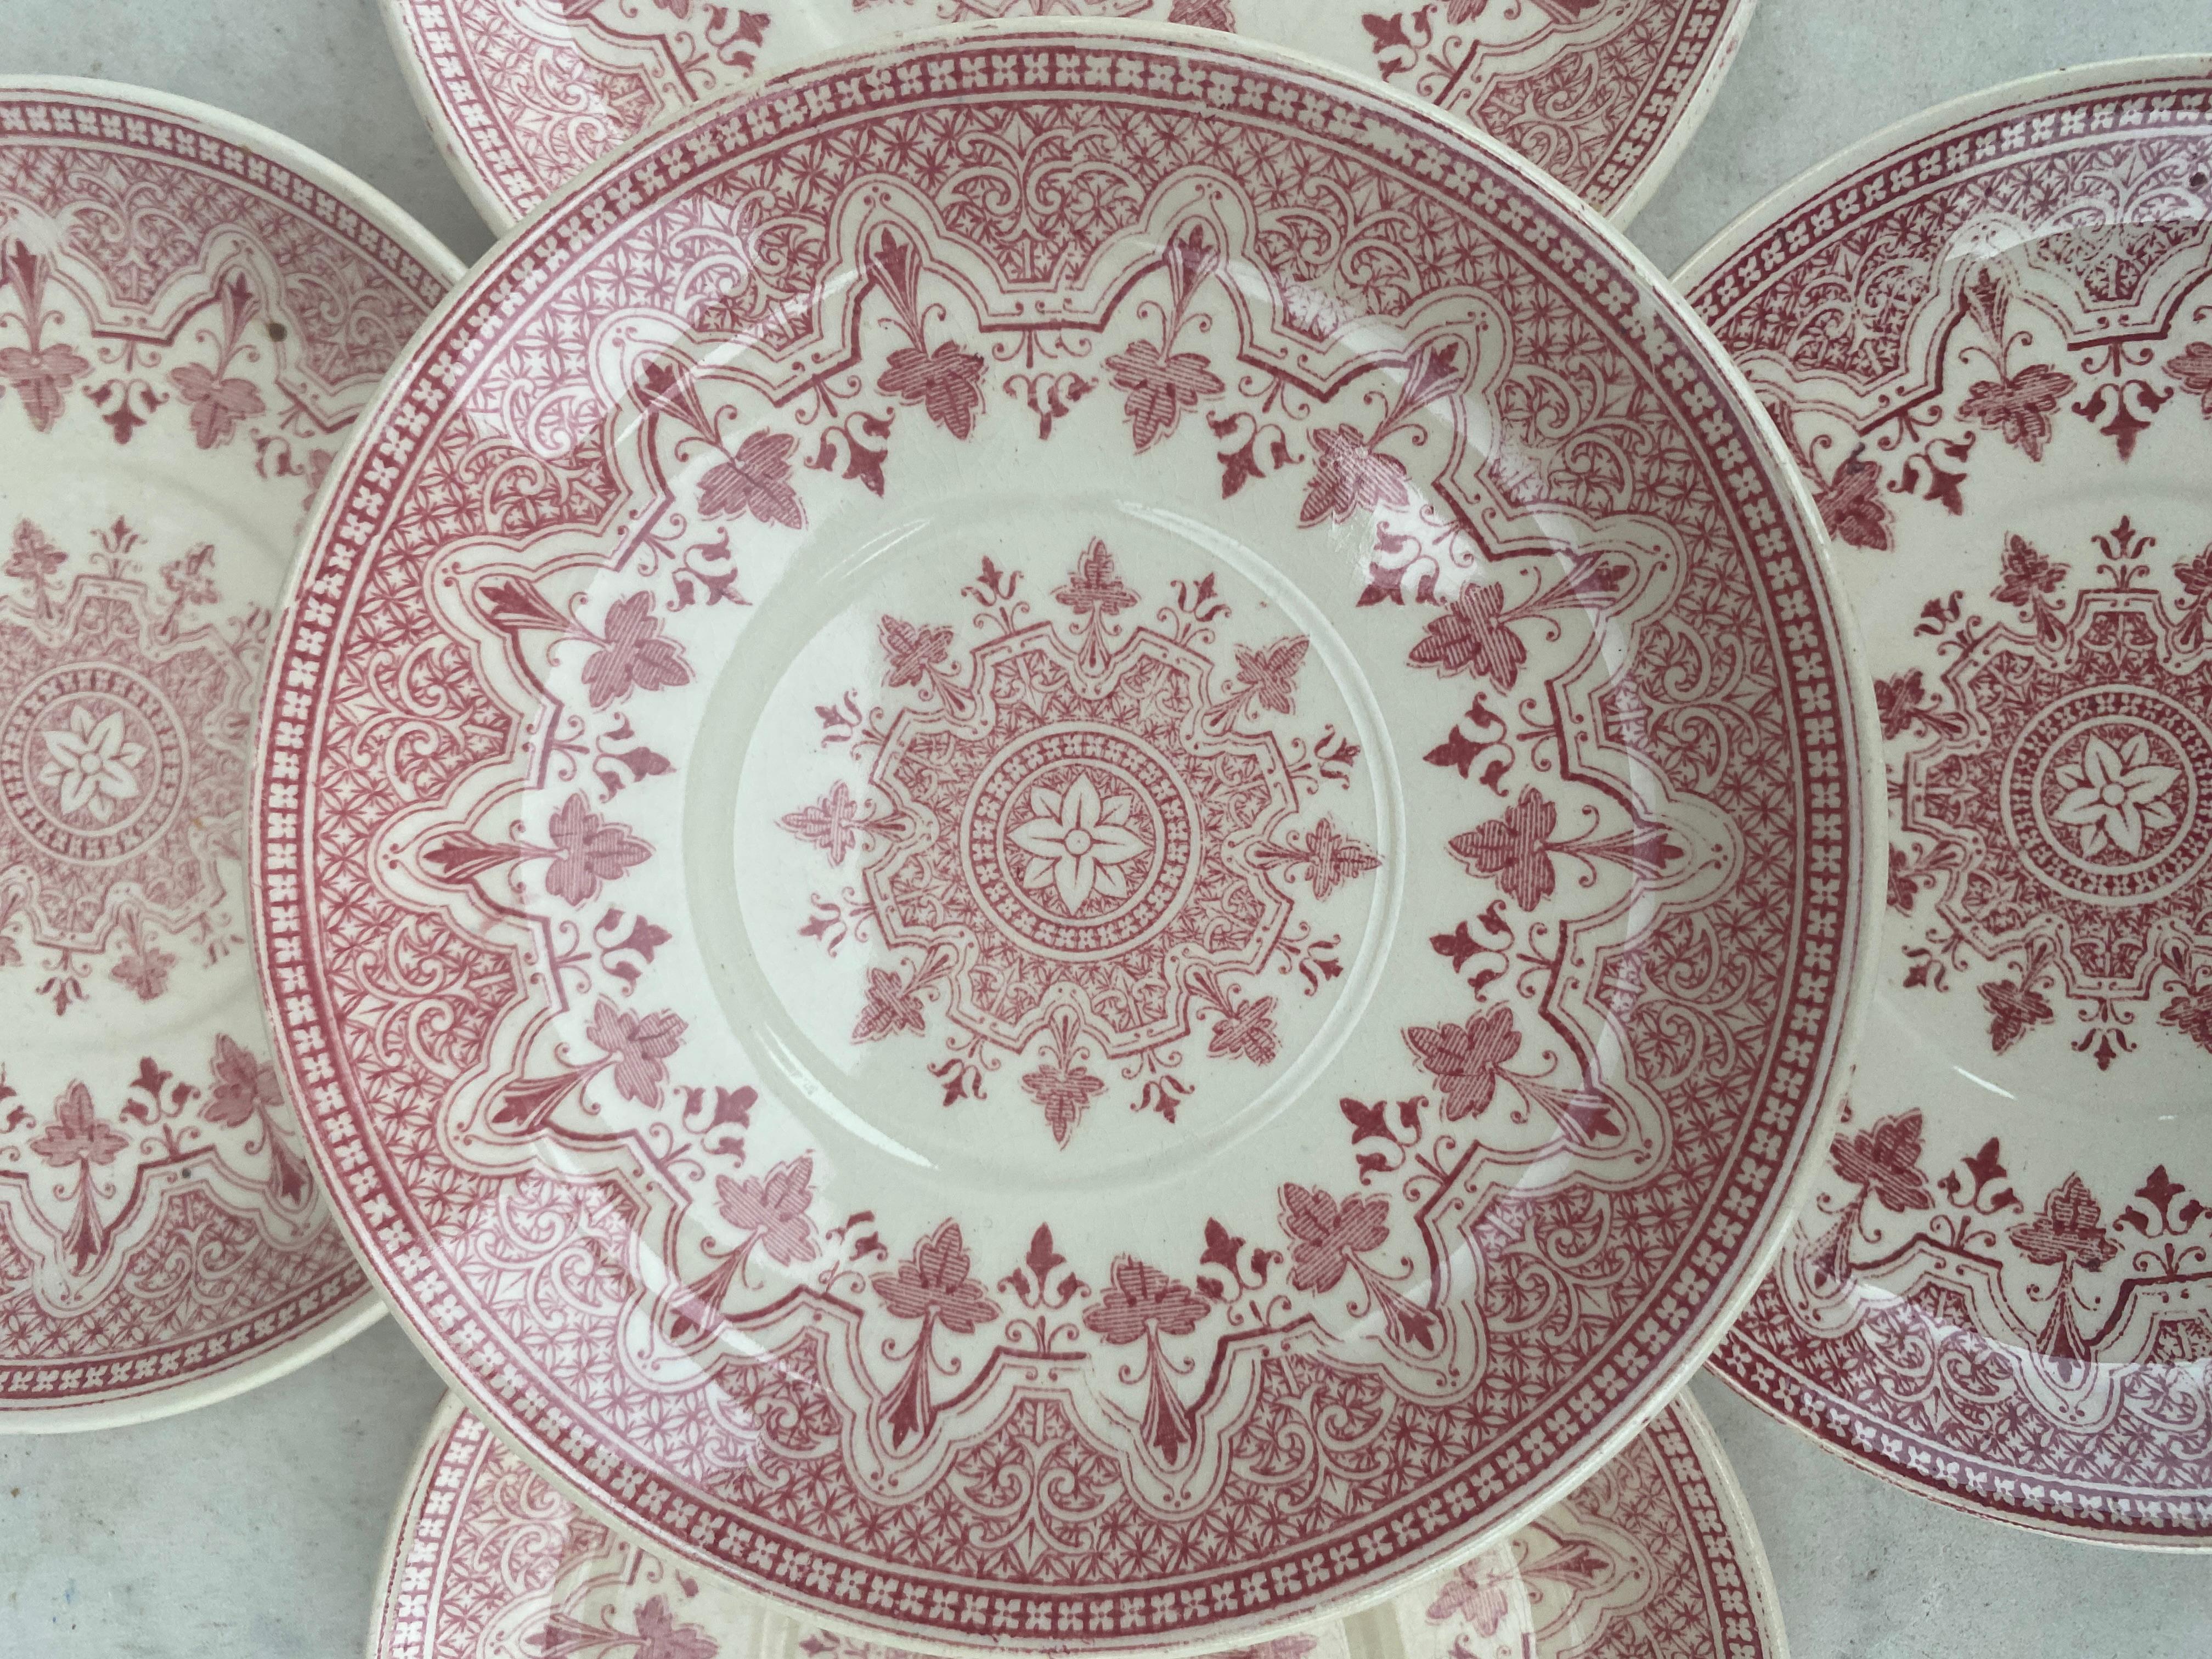 A rare set of 8 small plates with a geometric pattern signed Sarreguemines.
 